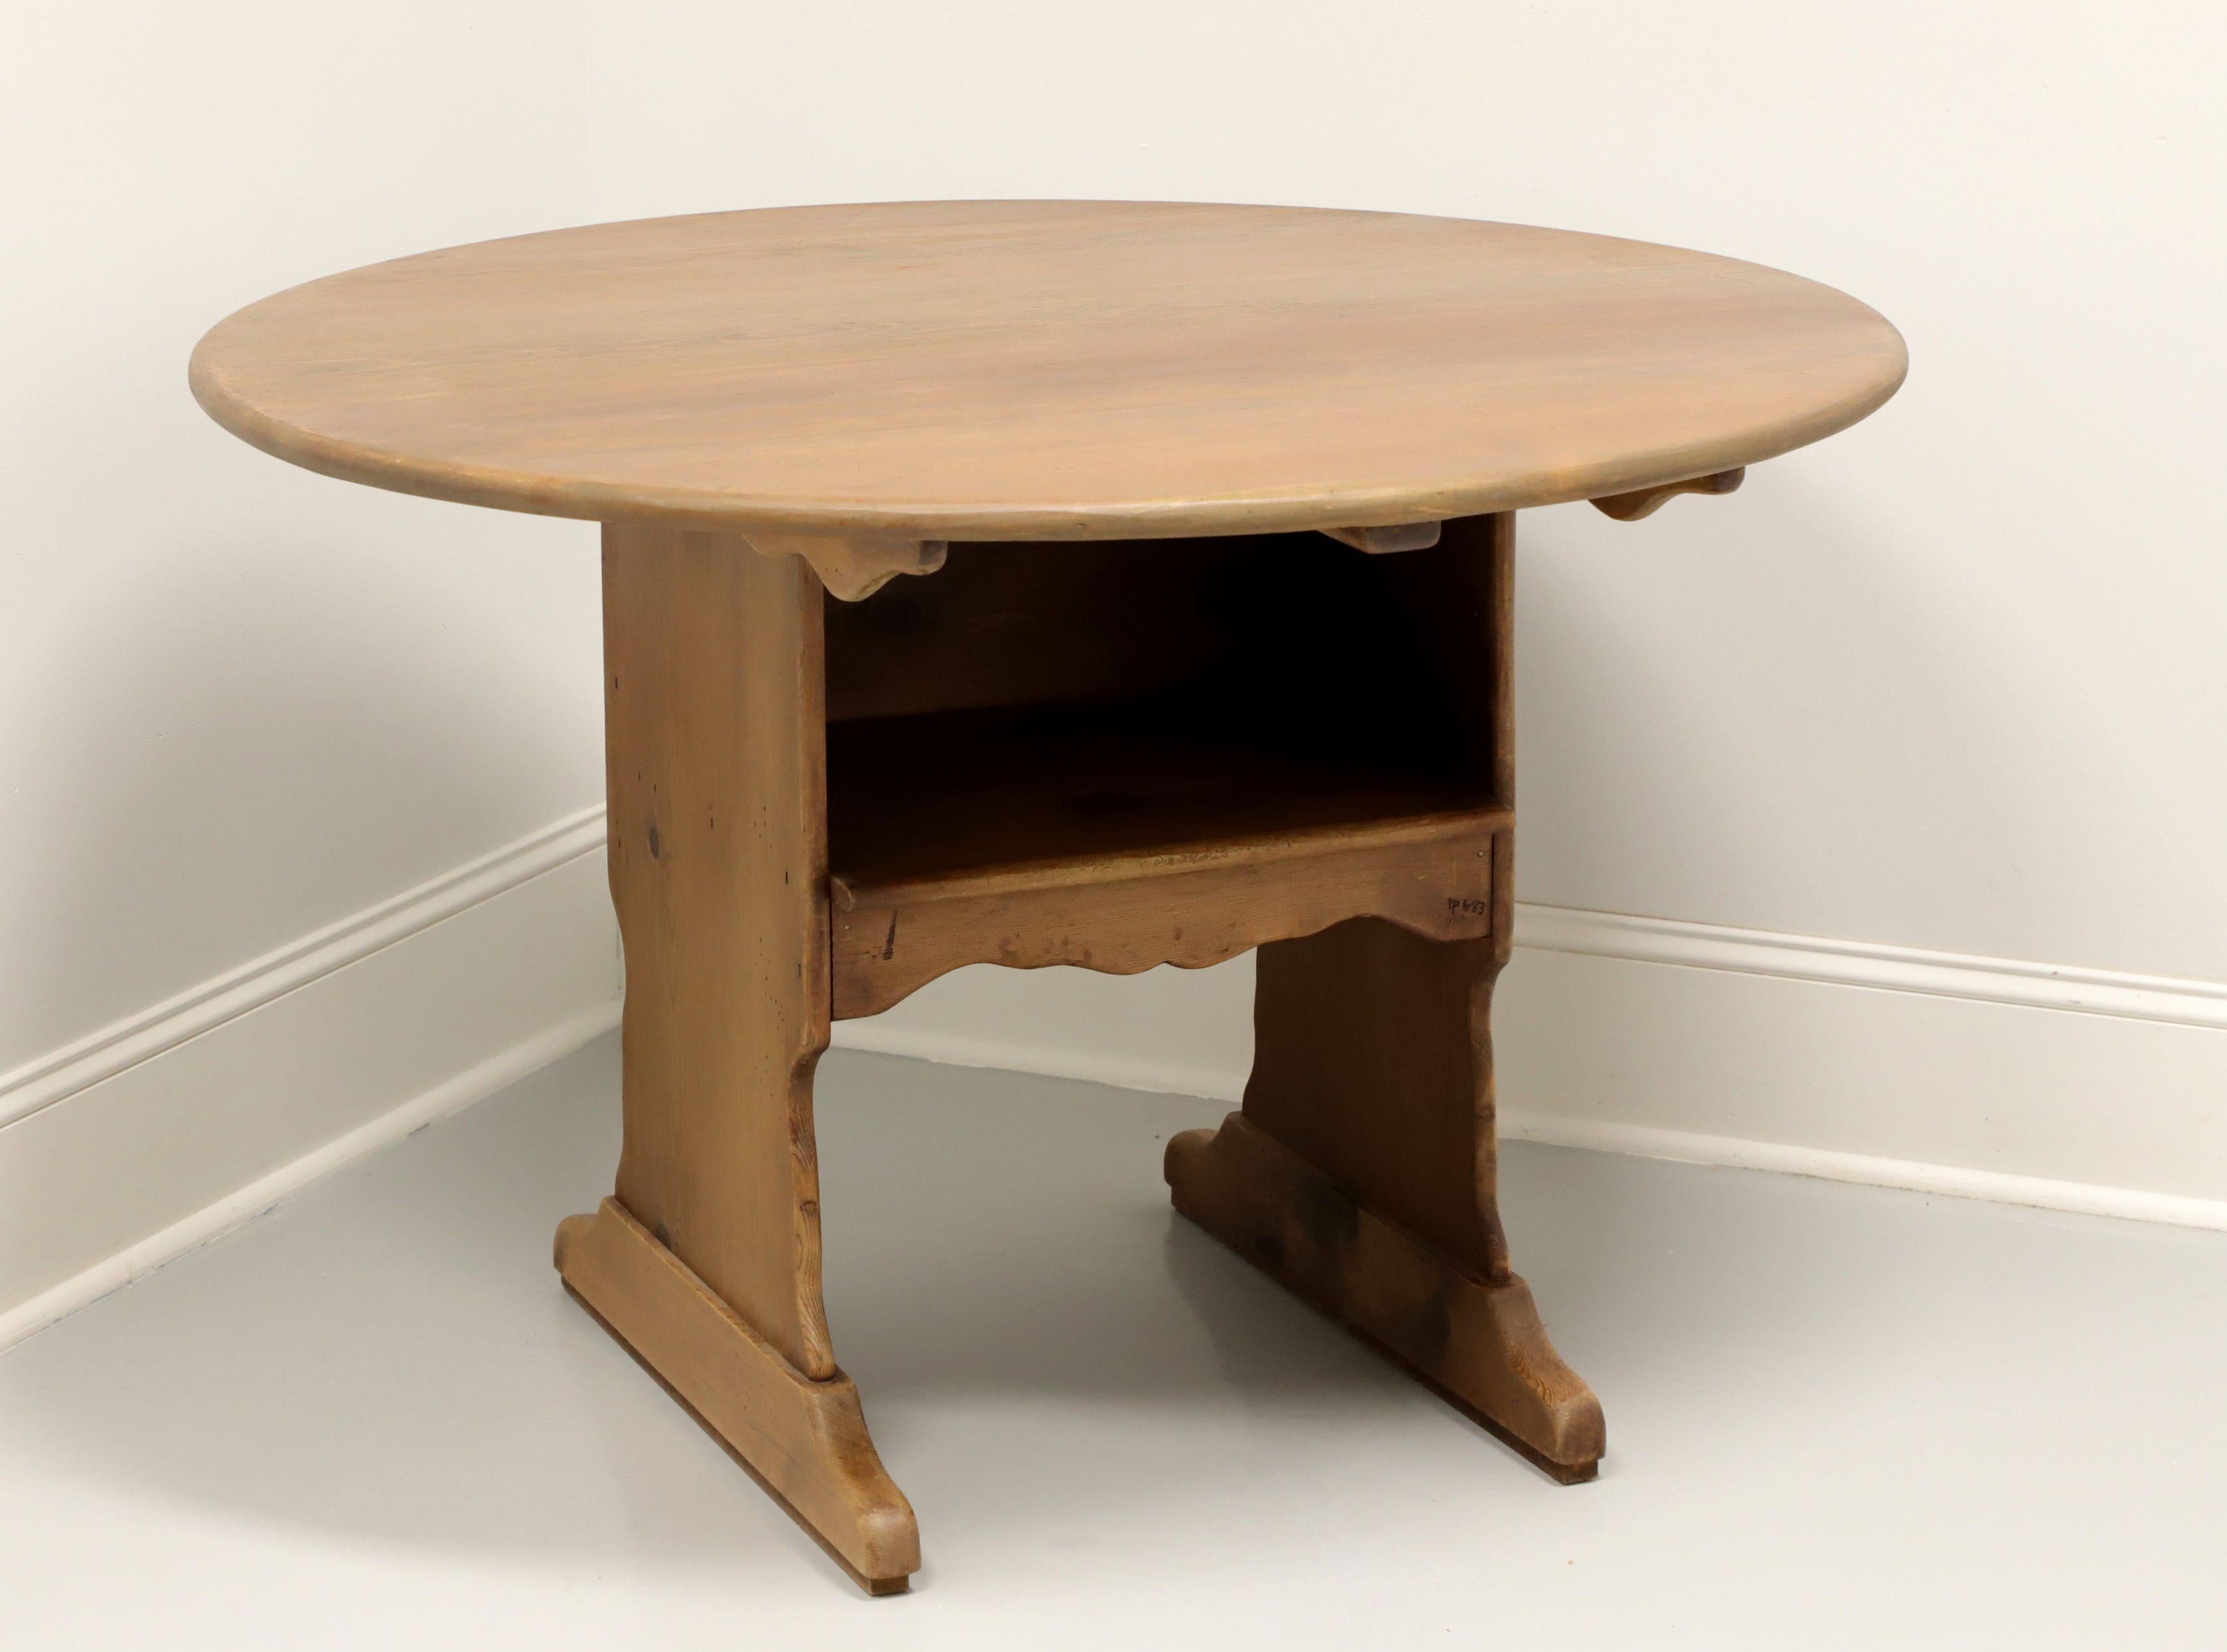 A Rustic style round tilt-top hutch dining table by Habersham Plantation, of Clarksville, Georgia, USA. Solid pine with chair-like pedestal base. Features tilt-top that flips back on wood pegs behind the pedestal base giving the appearance and use